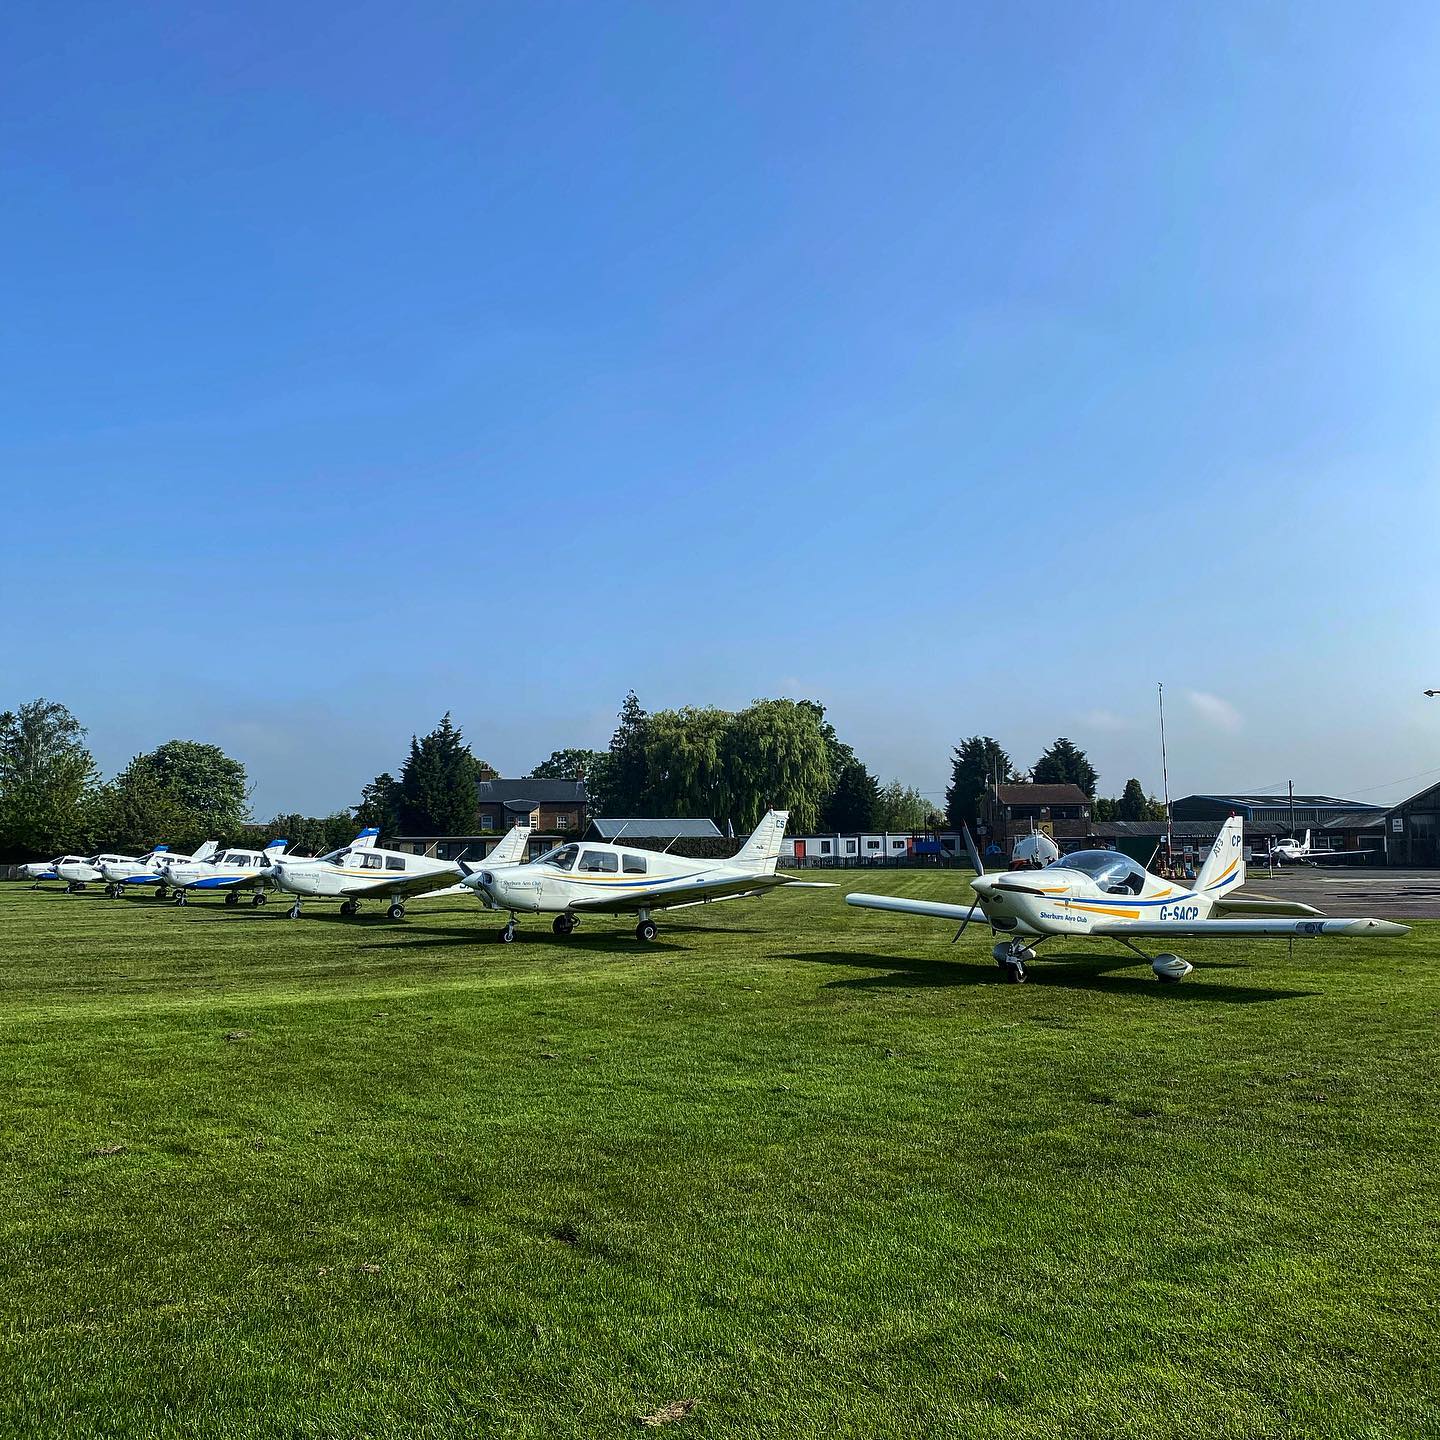 Best Aero clubs in the North of England